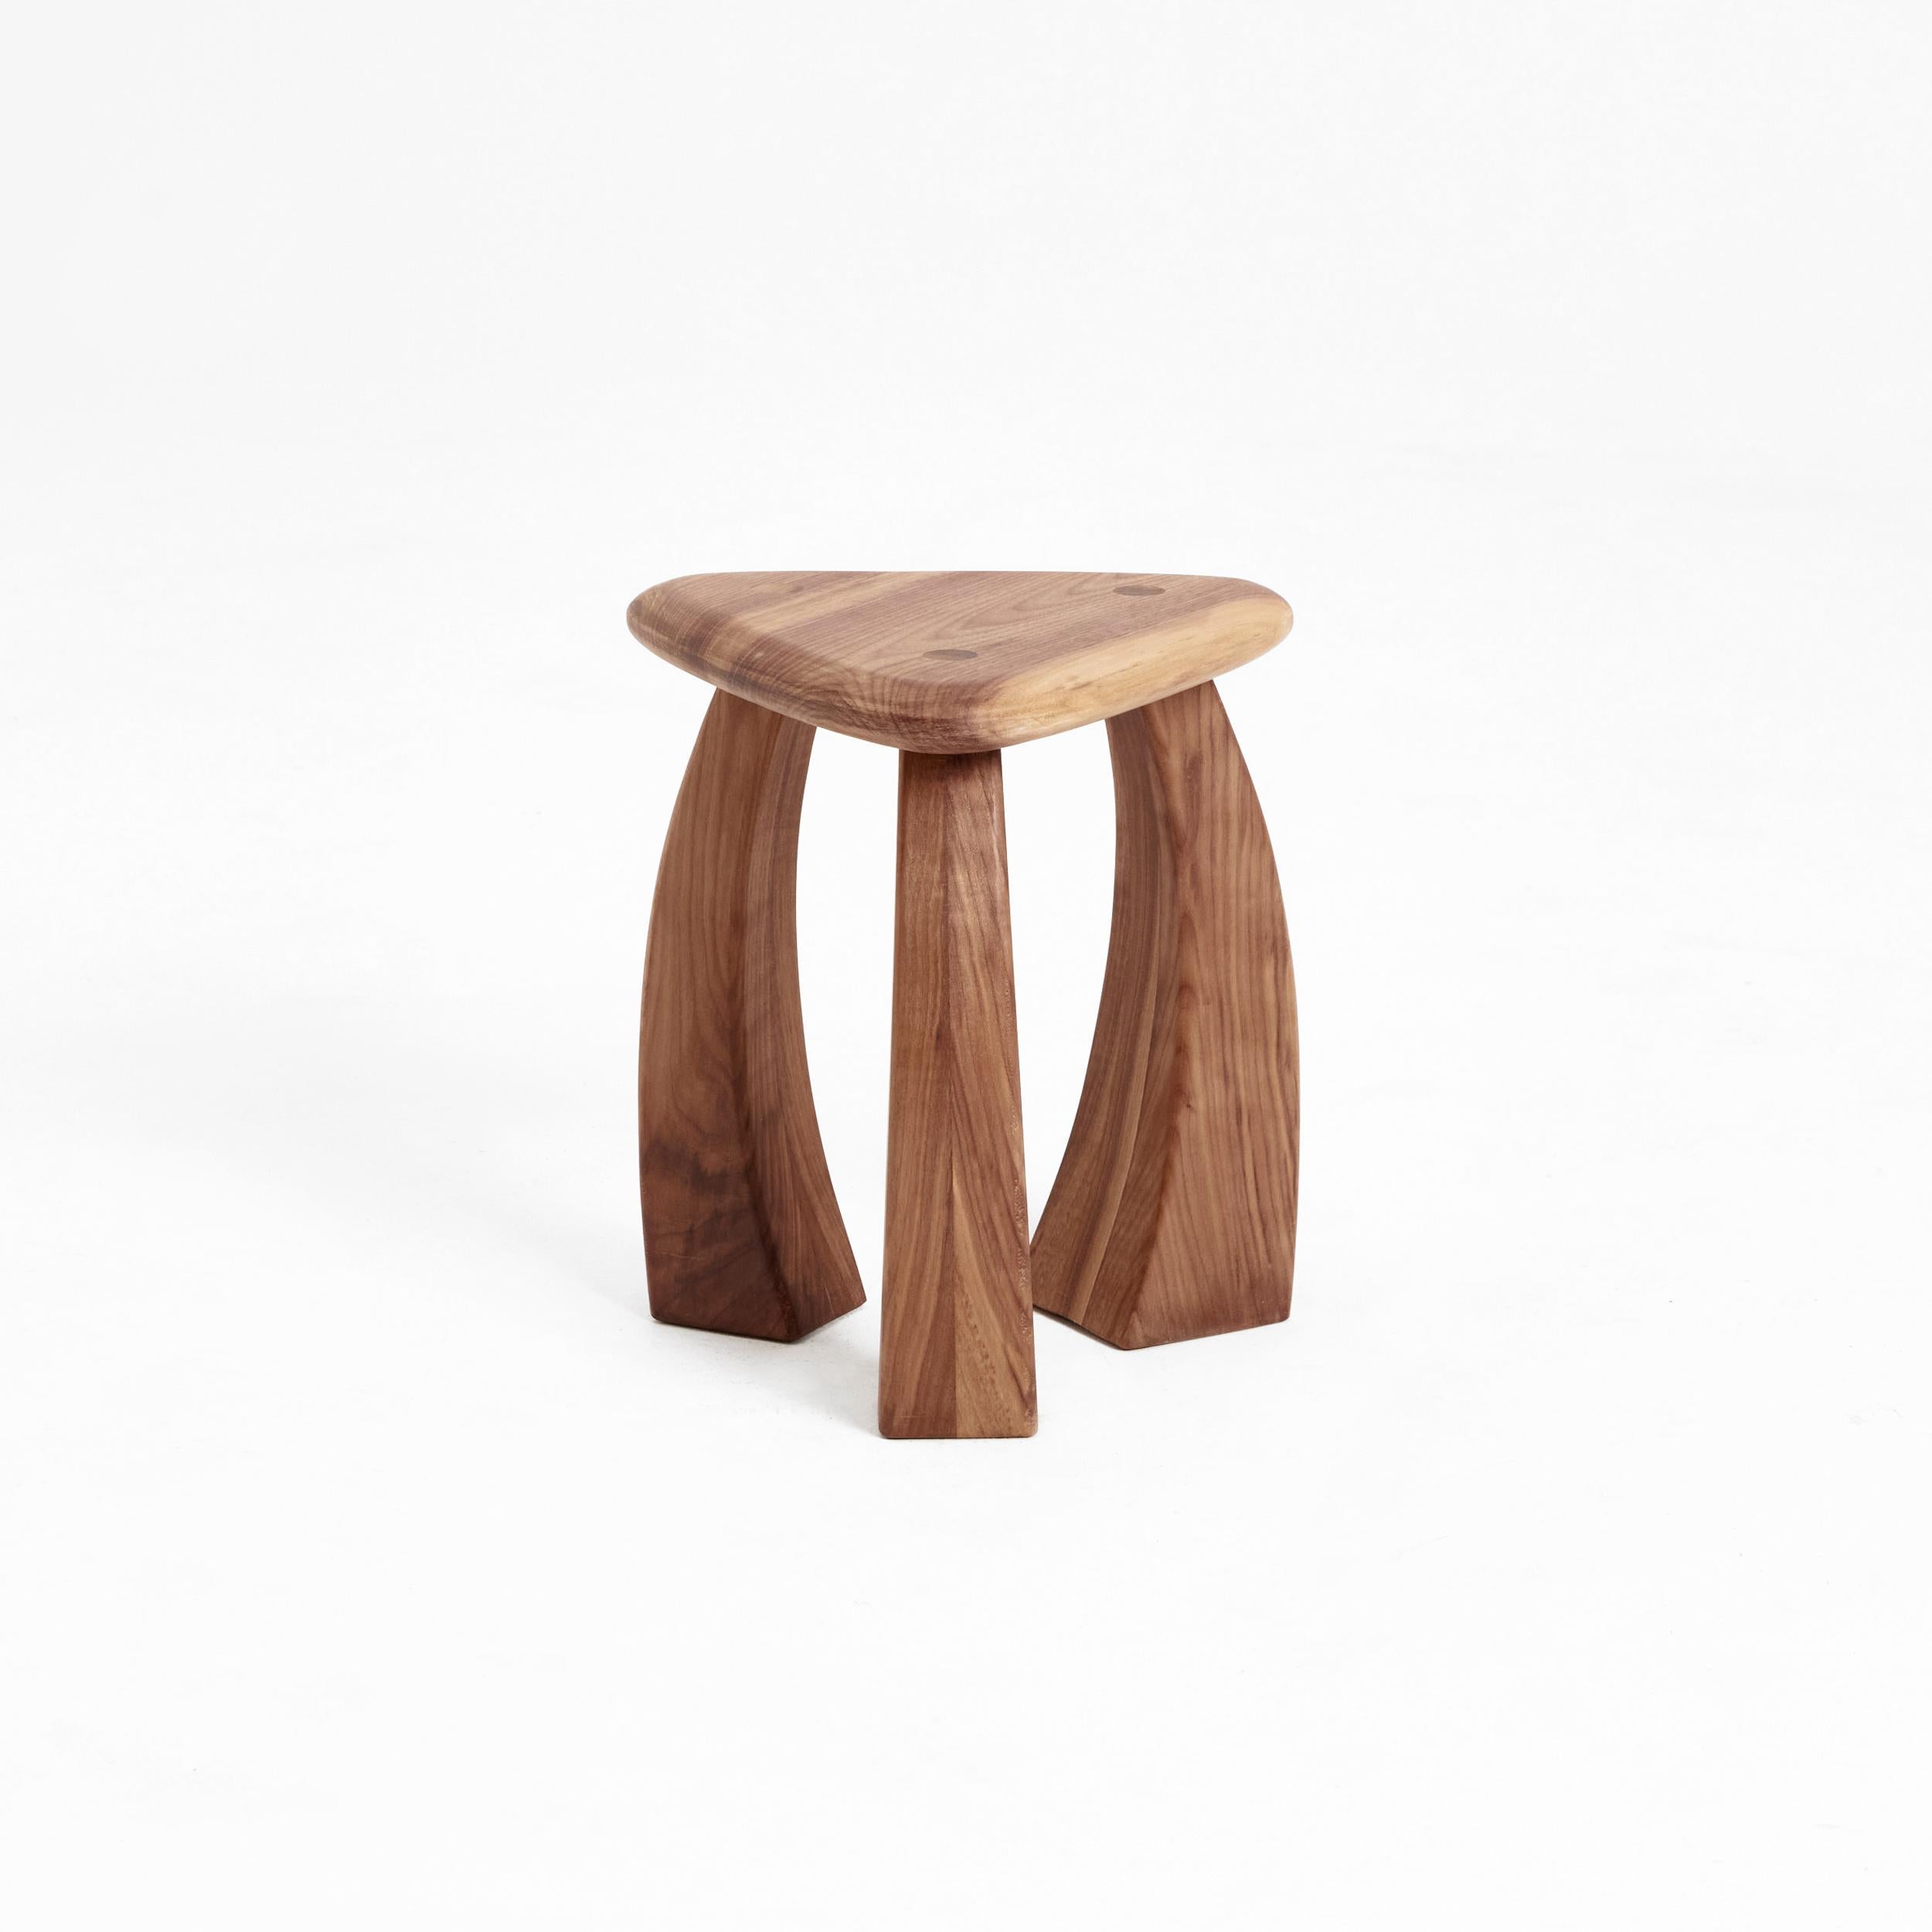 Arc de stool 37 in natural walnut by Project 213A
Dimensions: D 33 x W 33 x H 37 cm
Materials: Walnut wood. 

The smaller version of the stool's legs curves inwards towards its triangular seat, fusing to showcase exquisite craftsmanship. The